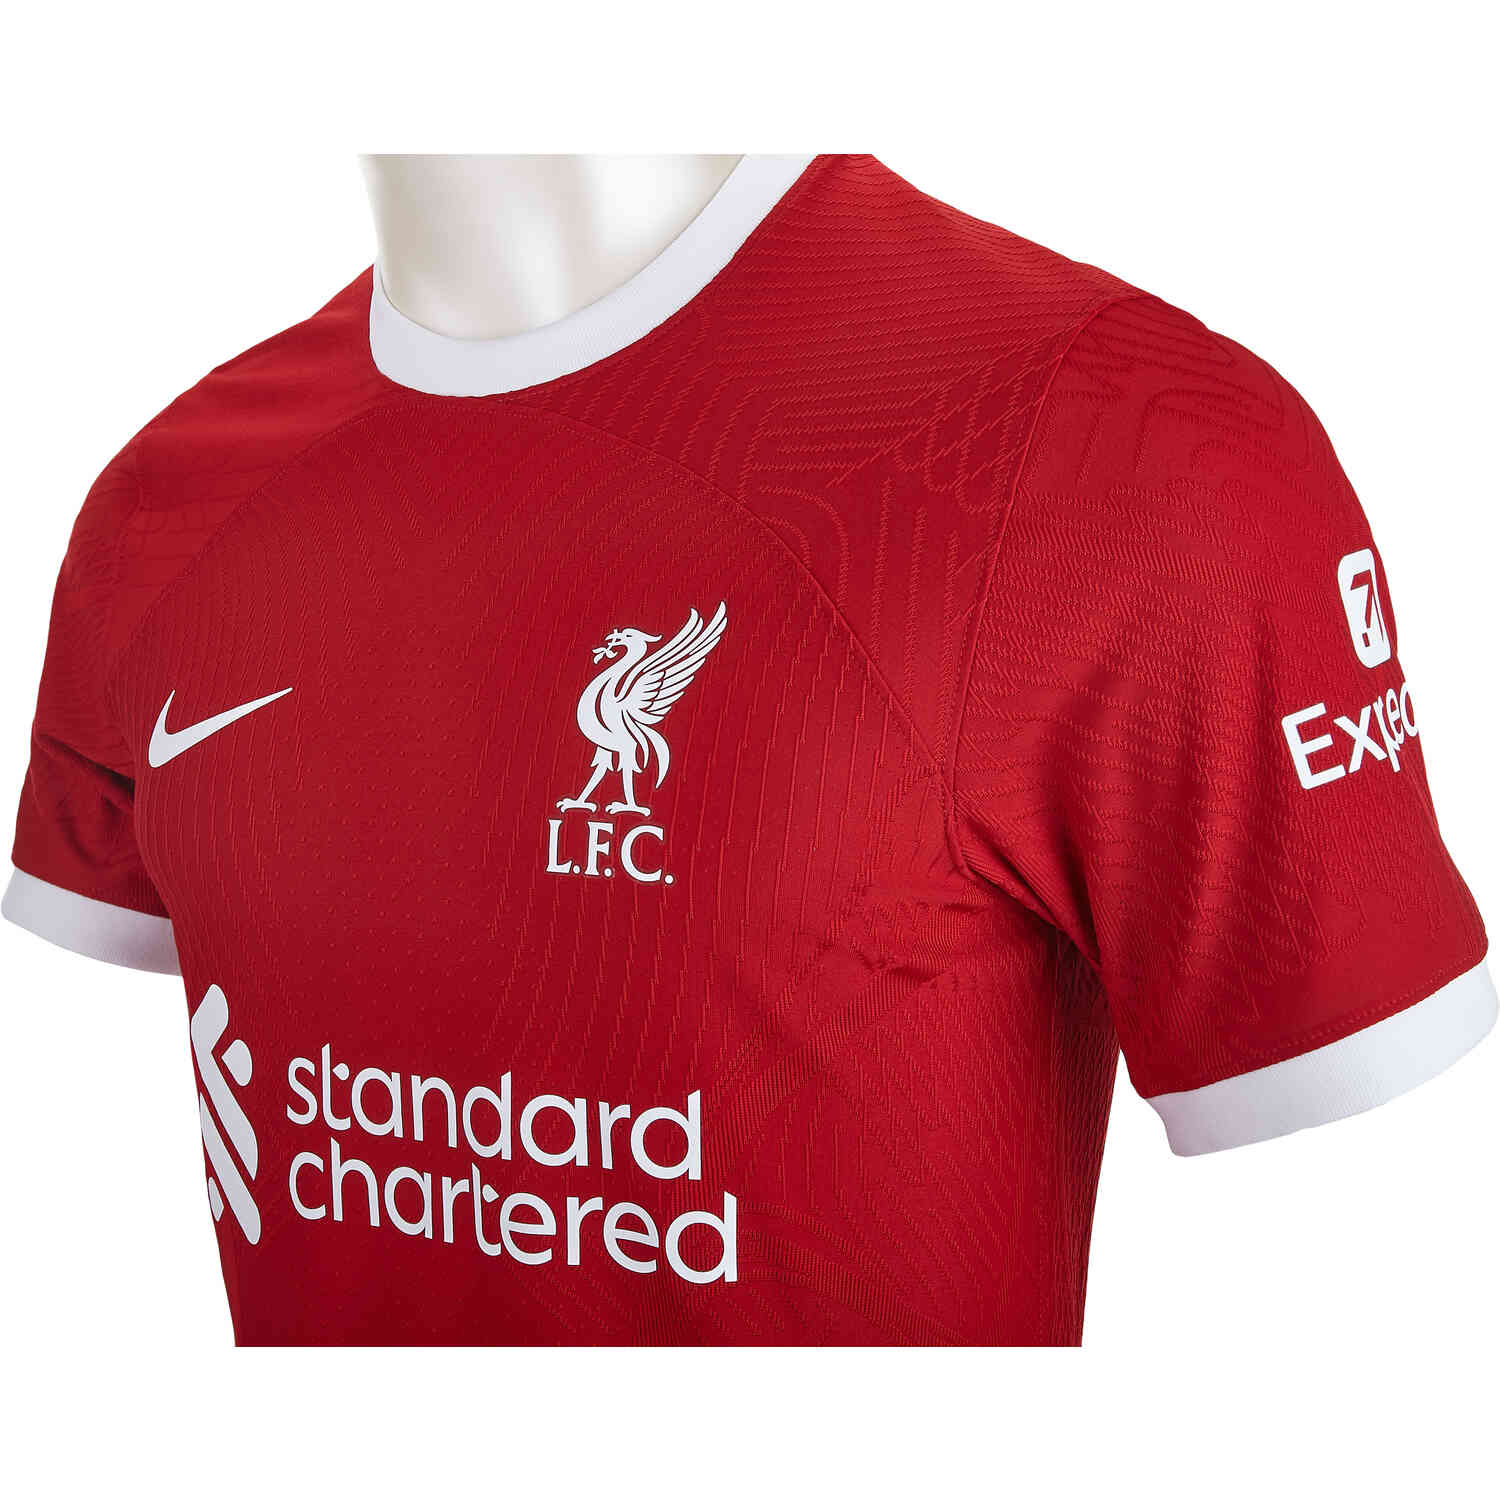 2023/24 Nike Luis Diaz Liverpool Home Match Jersey